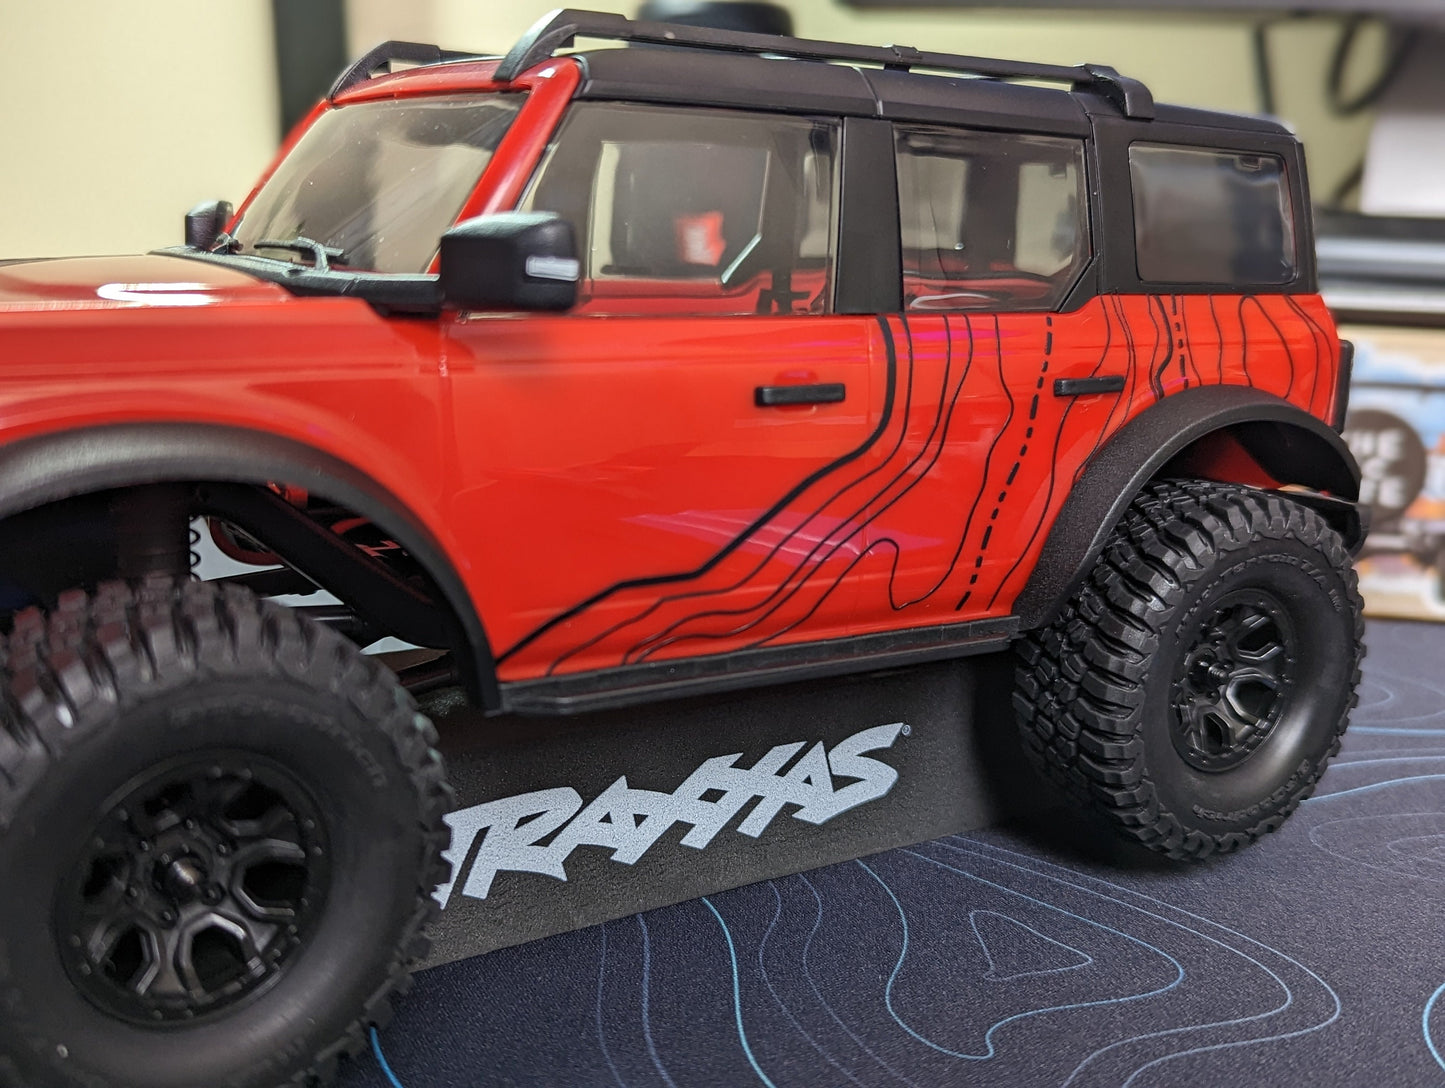 Topography Graphics for the TRX-4M Bronco, by The RC Girl